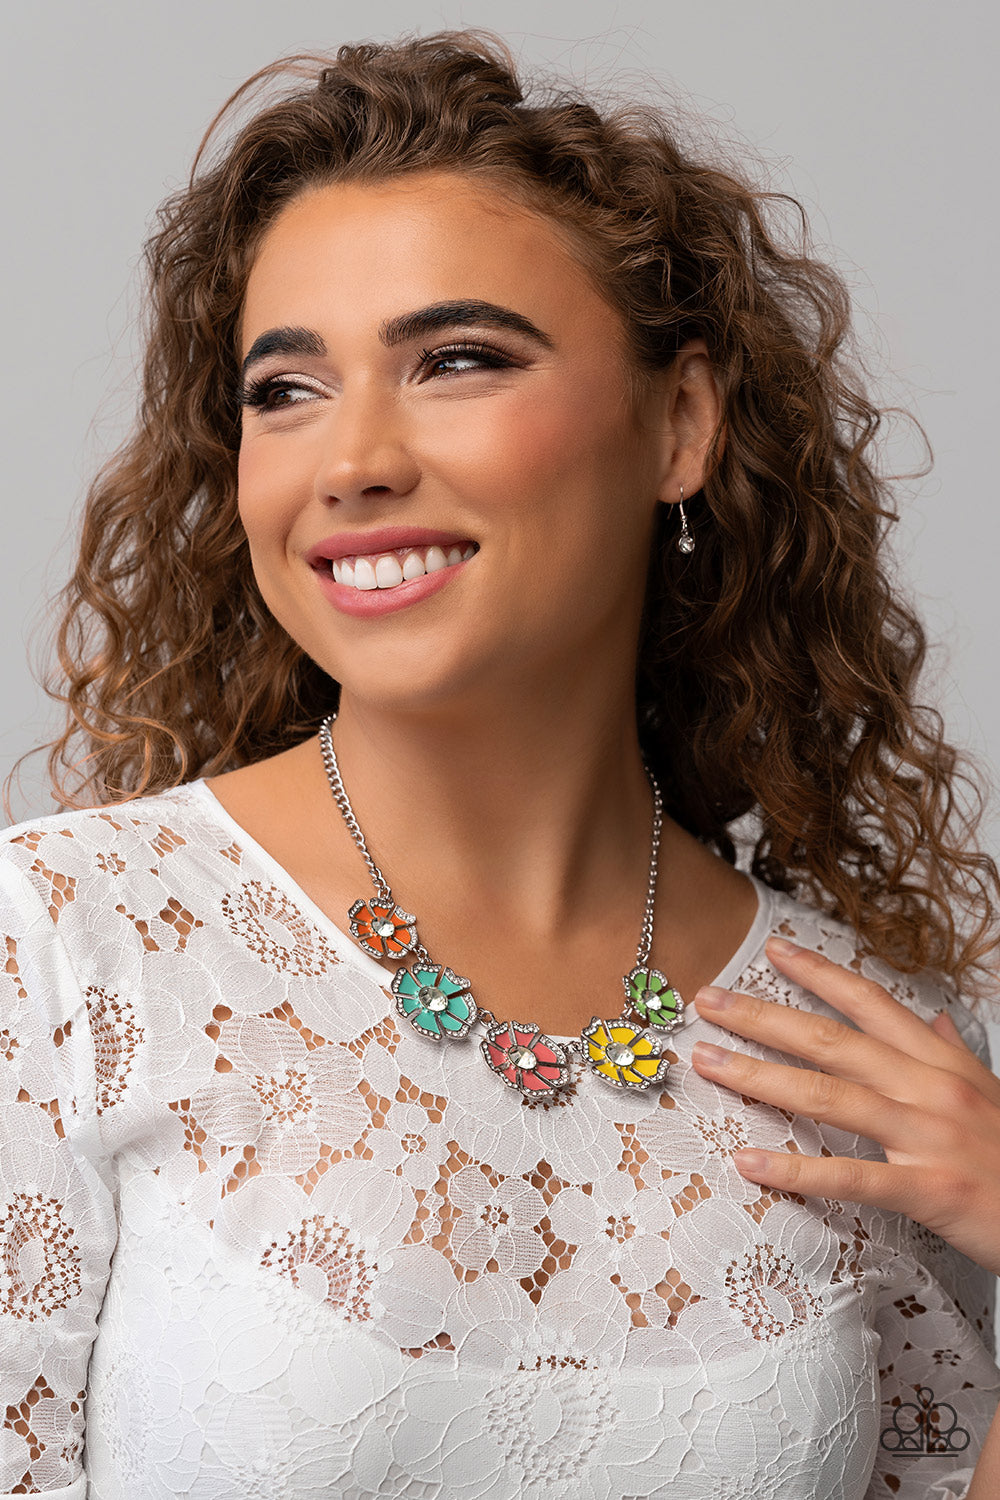 Paparazzi Accessories Playful Posies - Multi Dotted with dainty white rhinestone petal edges and white gem centers, a vibrant assortment of Burnt Coral, Samoan Sun, Orange Tiger, apple green, and tiffany blue flowers link below the collar for a playful po